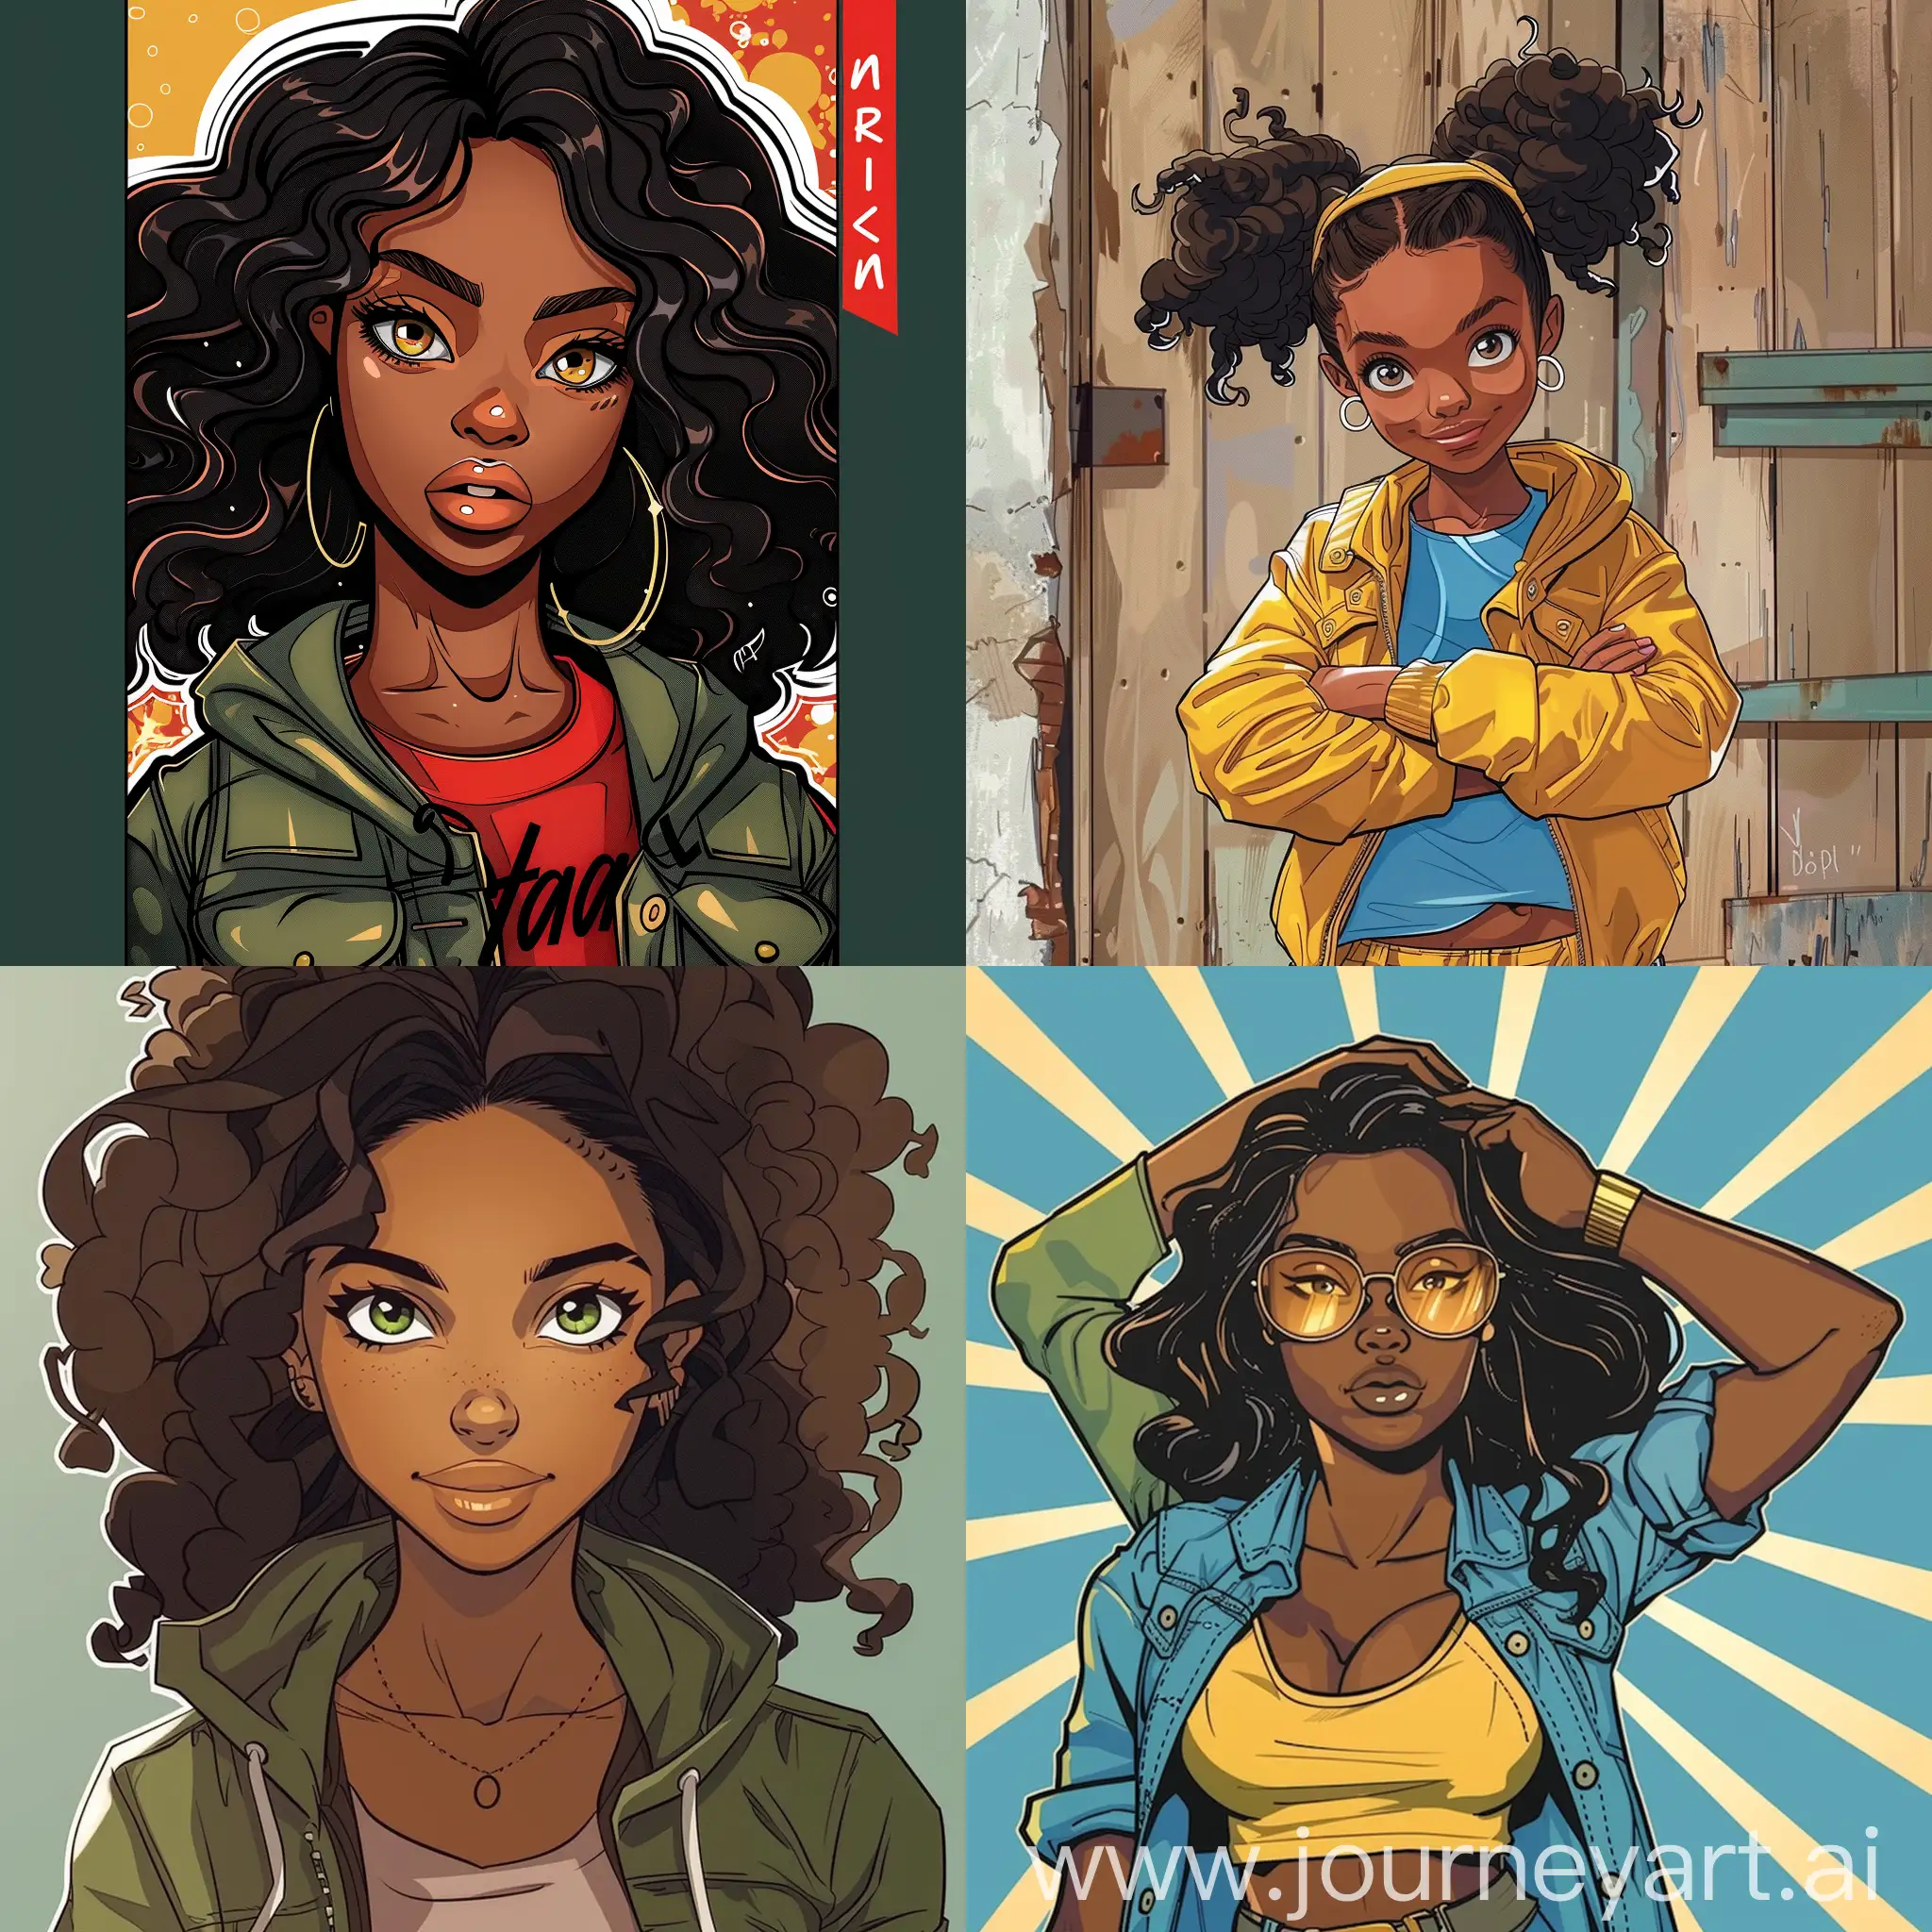 Cover d'une bande dessinée.
Nom du cover fara.
Personnages black girl in cartoon style.